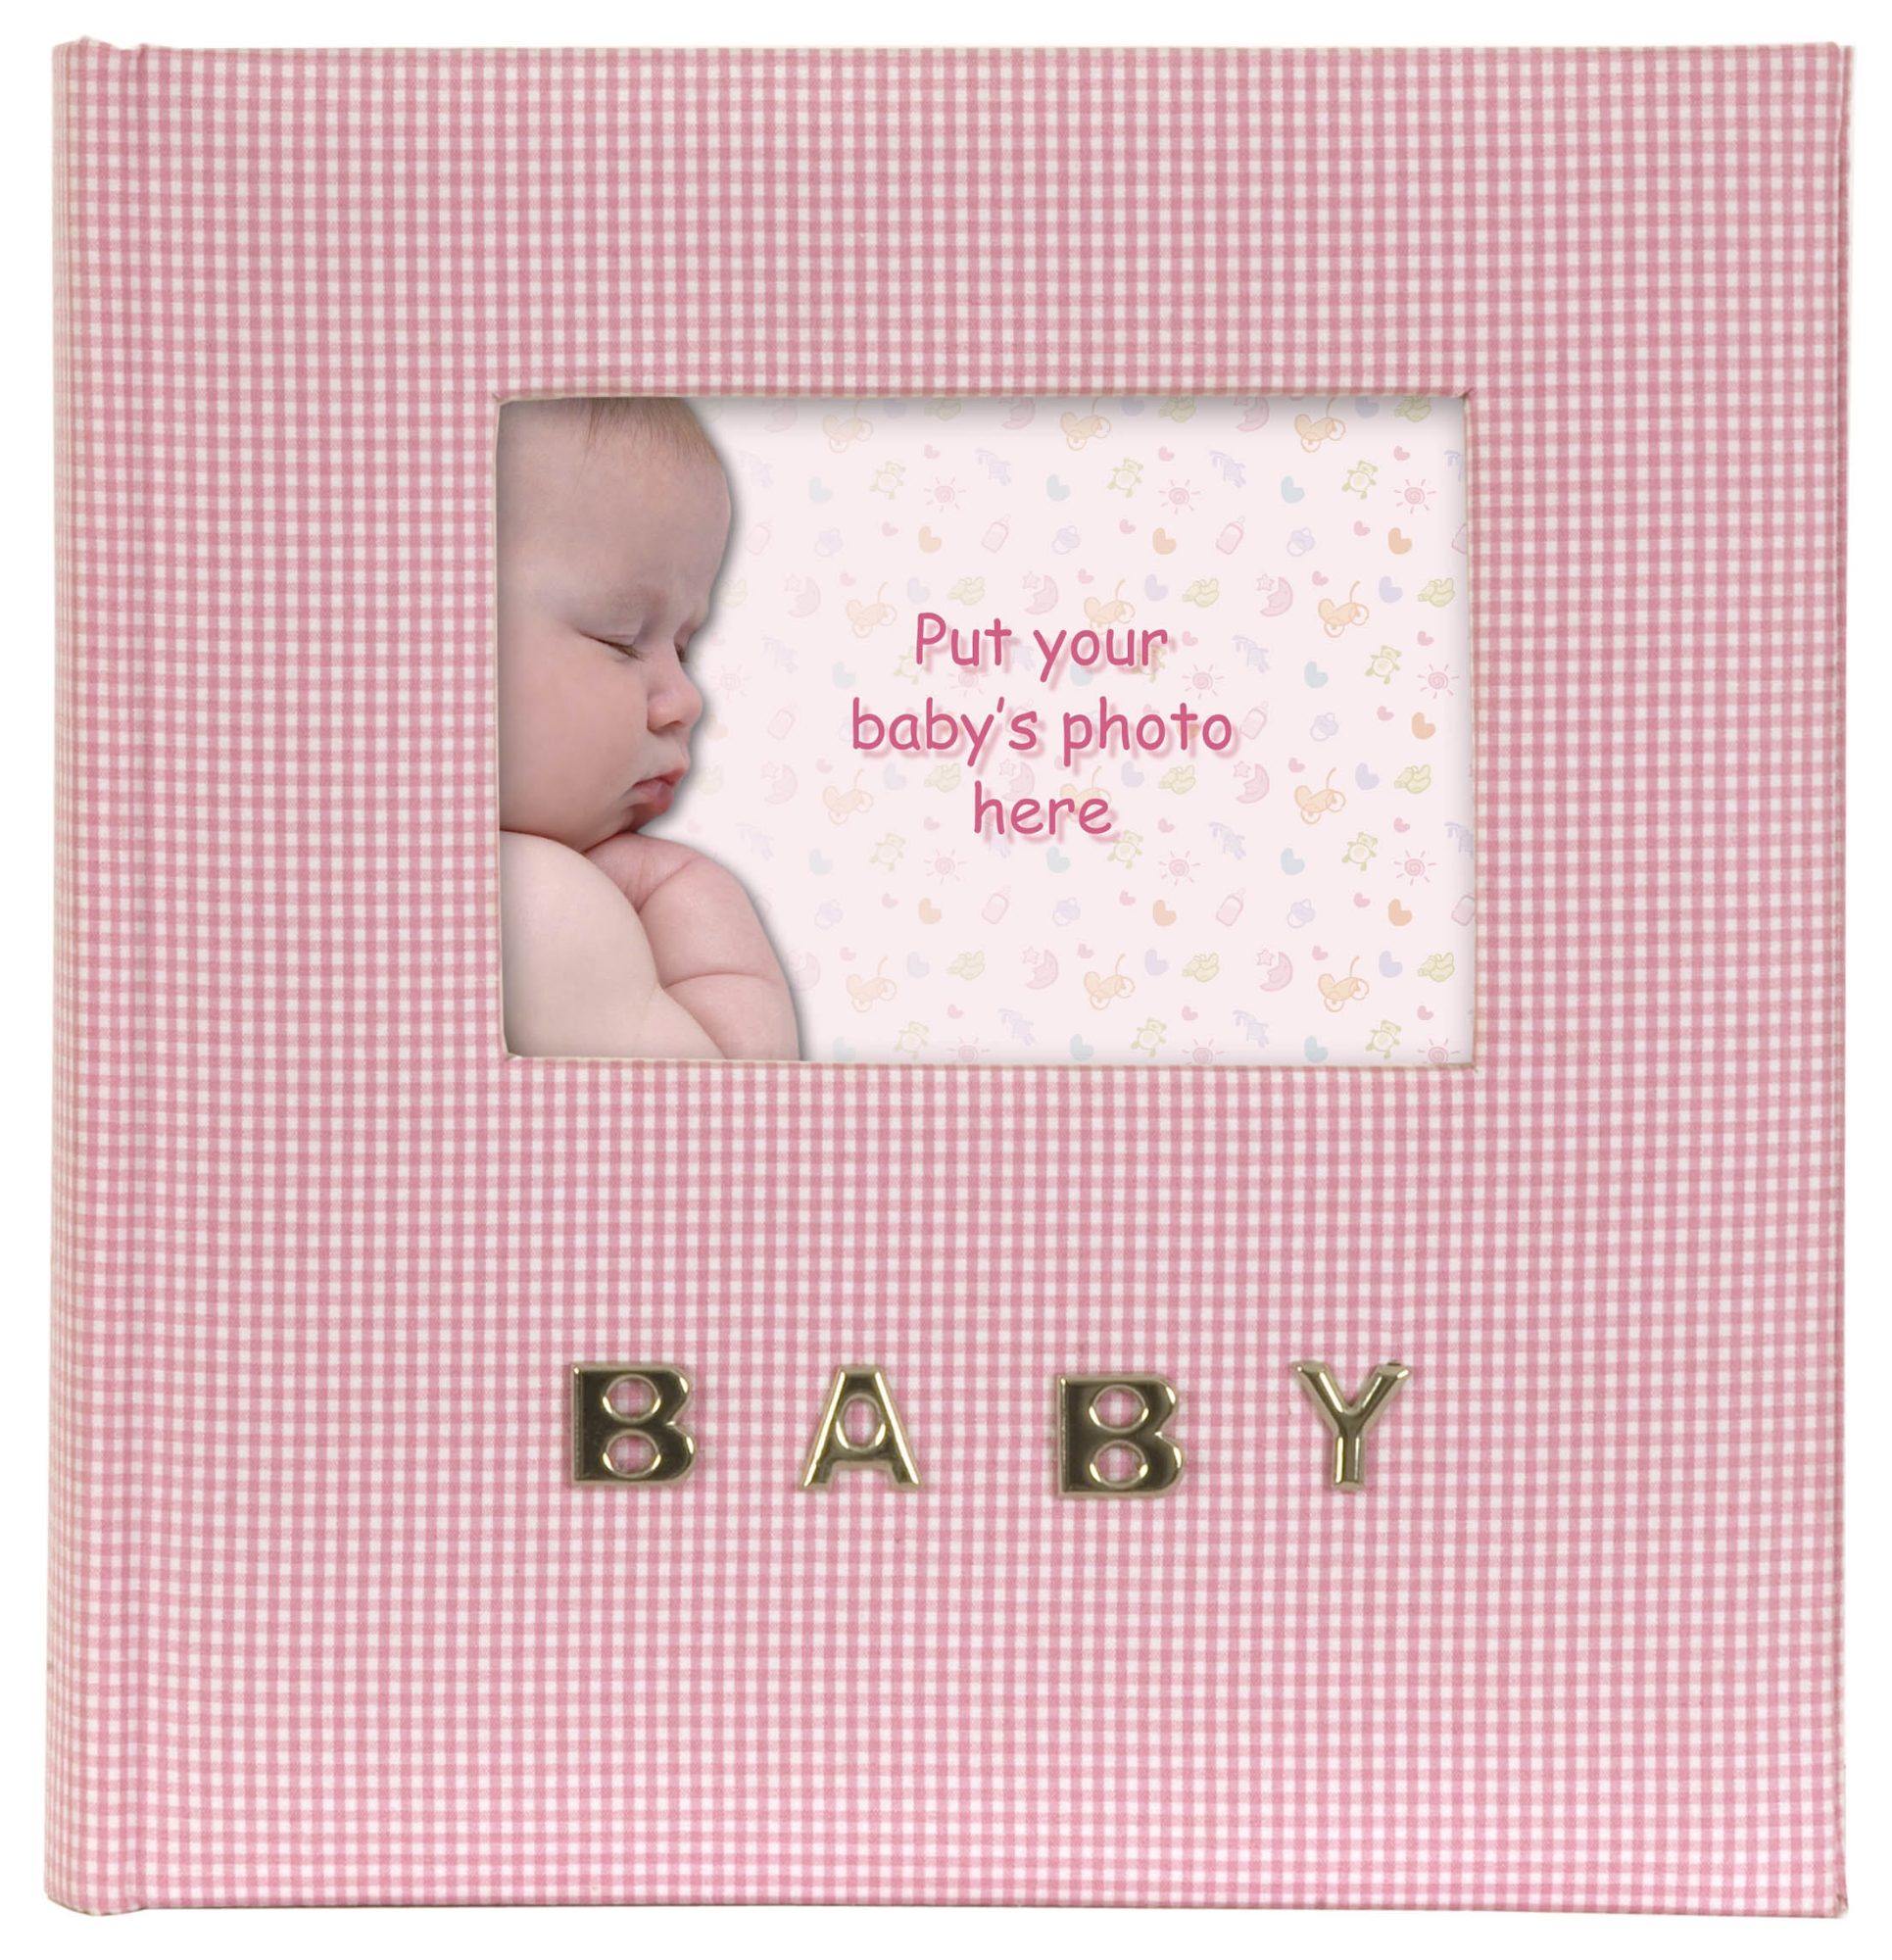 Baby Gingham Pink Q9306337